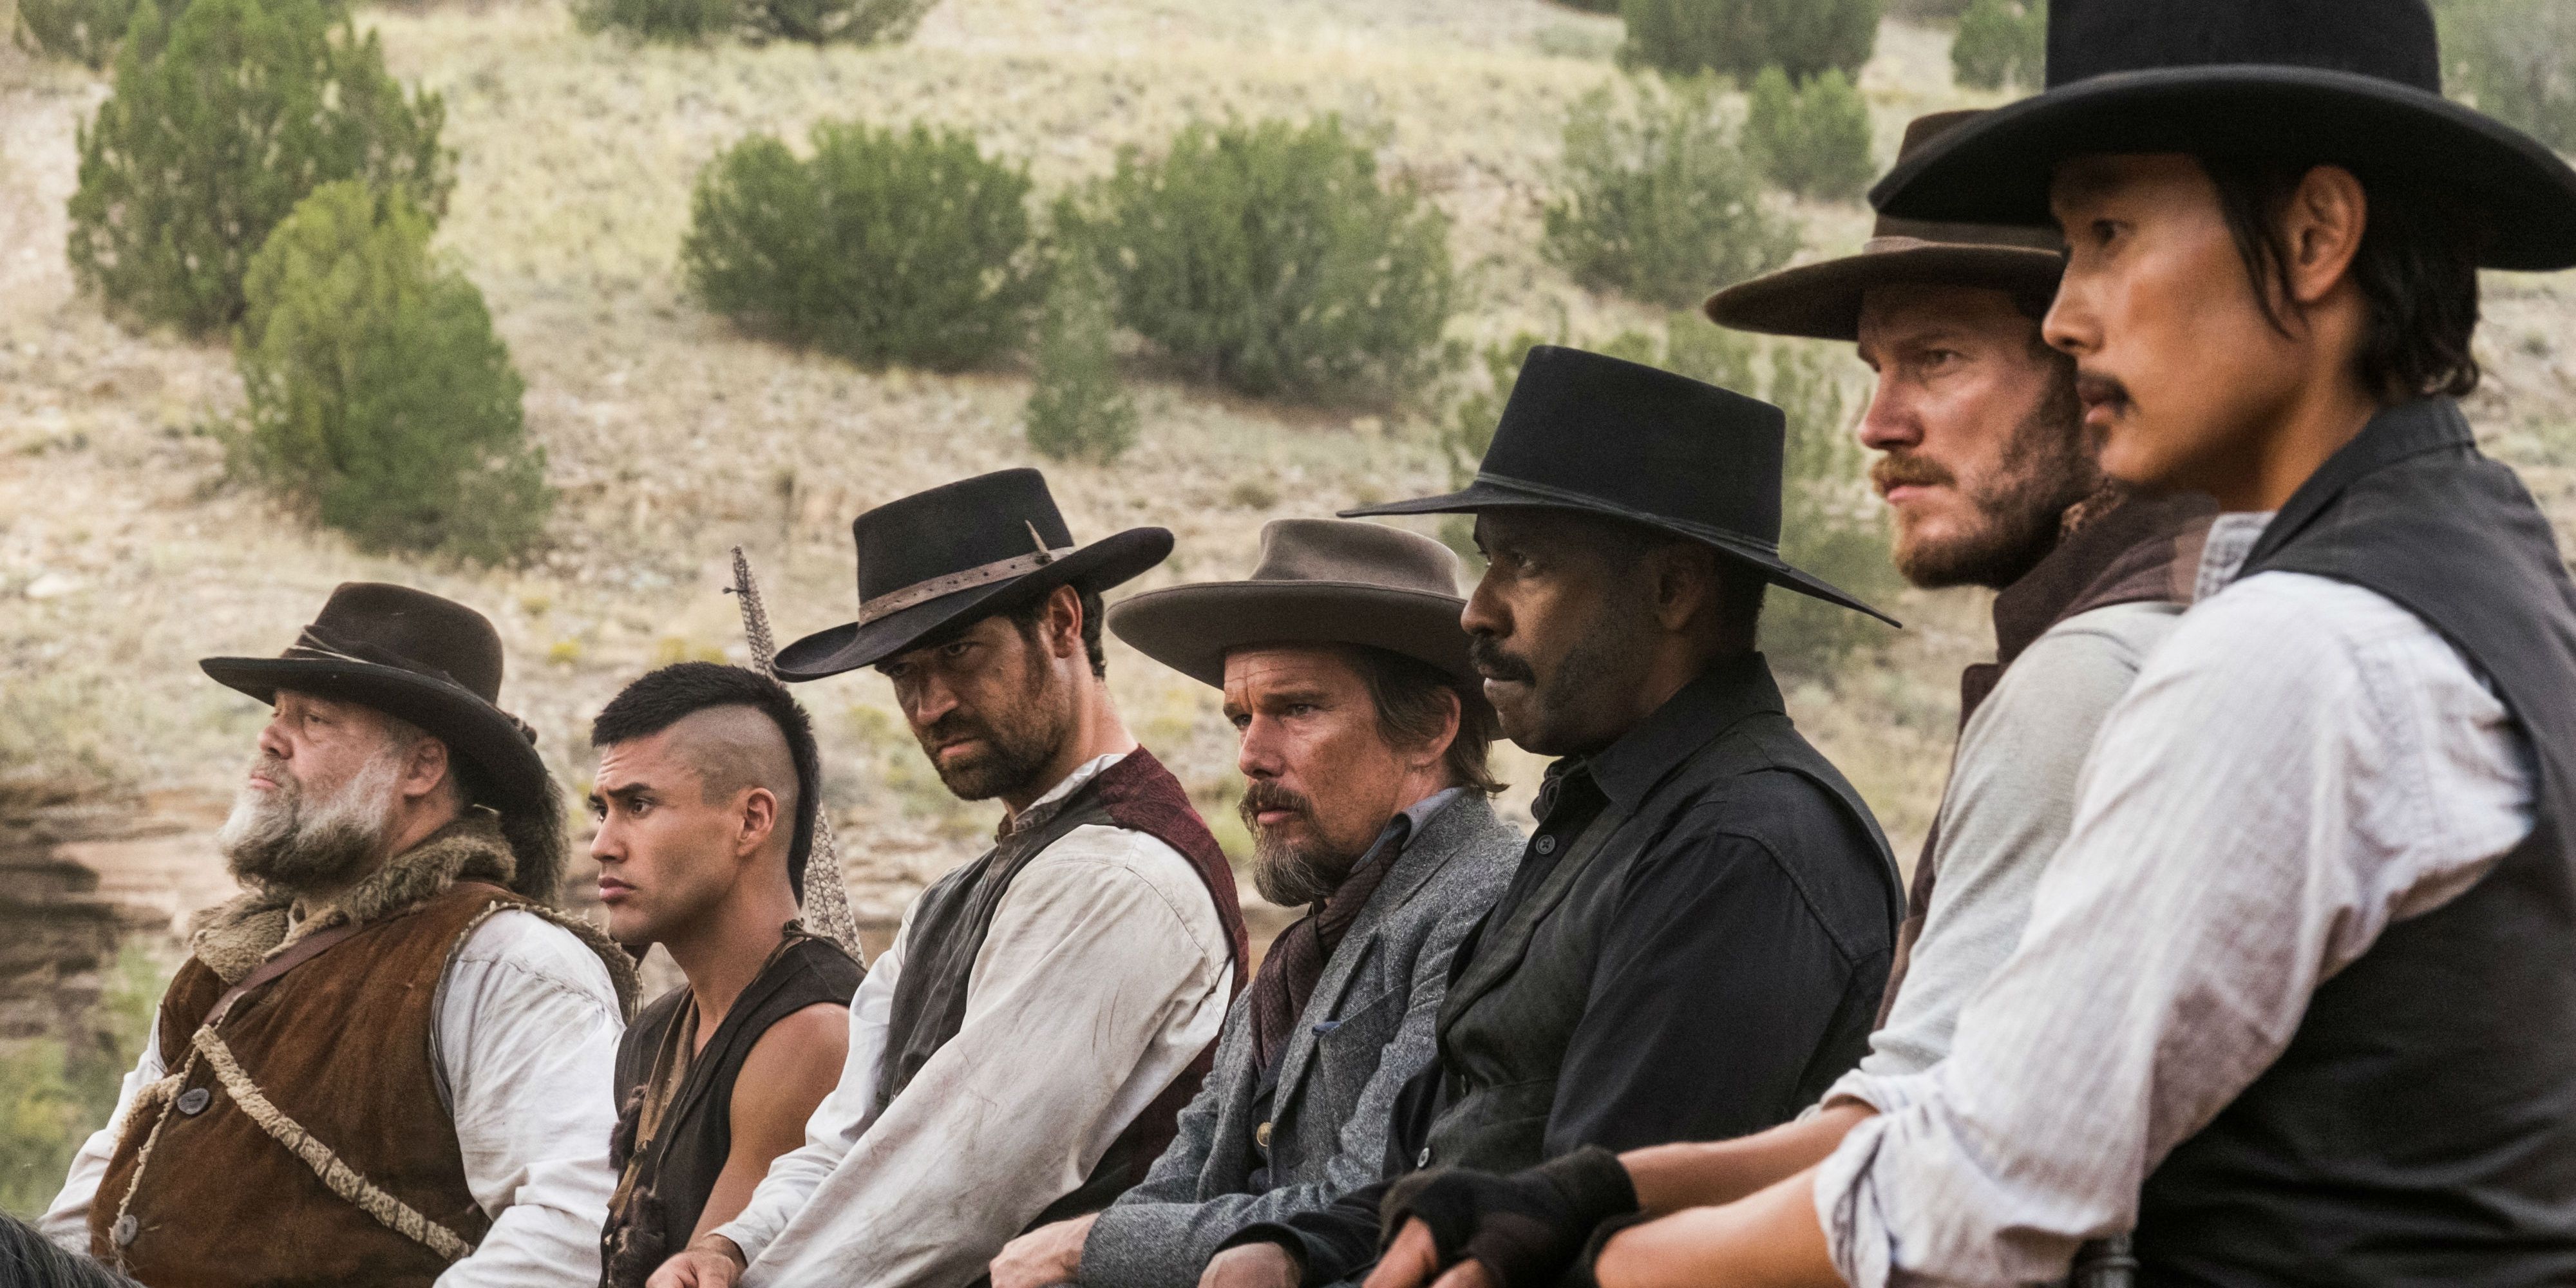 The seven heroes in The Magnificent Seven